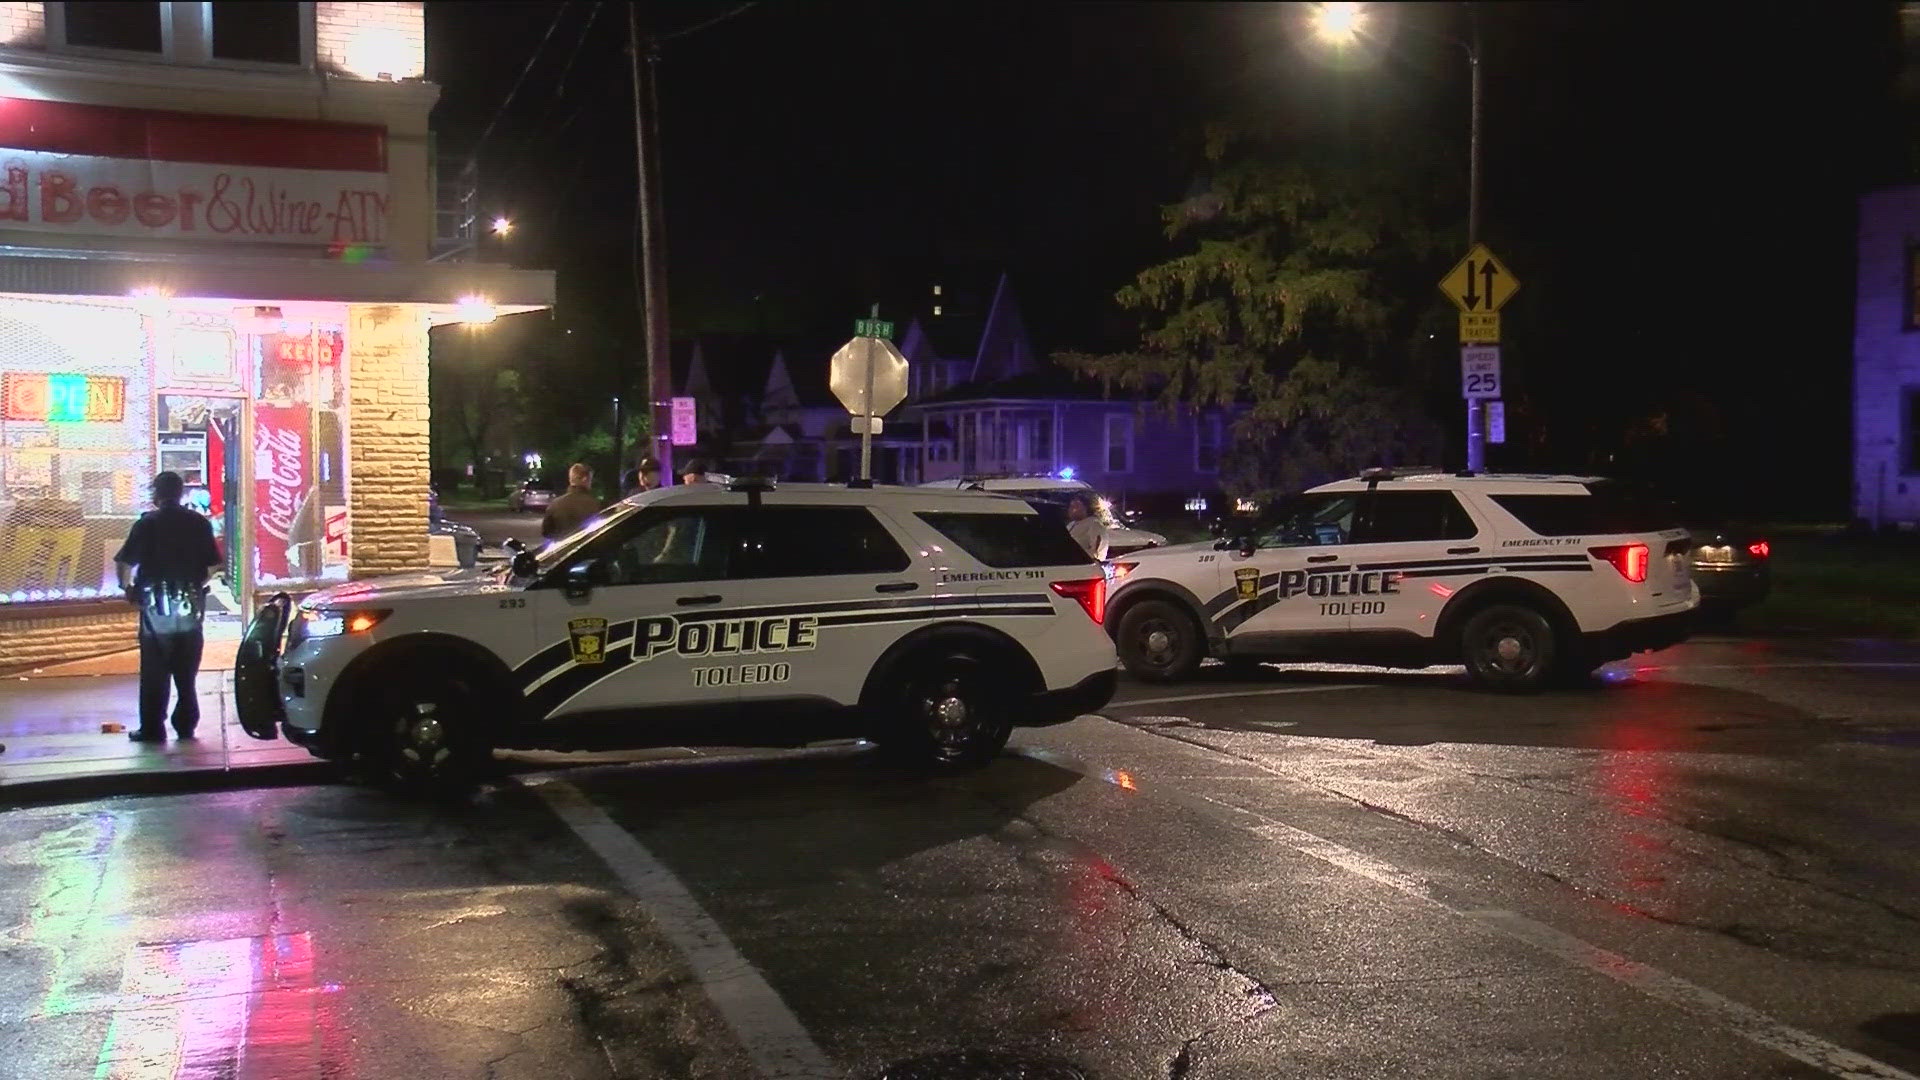 Toledo police say the suspect who shot the victim fled the scene at the corner of Bush Street and North Erie Street.